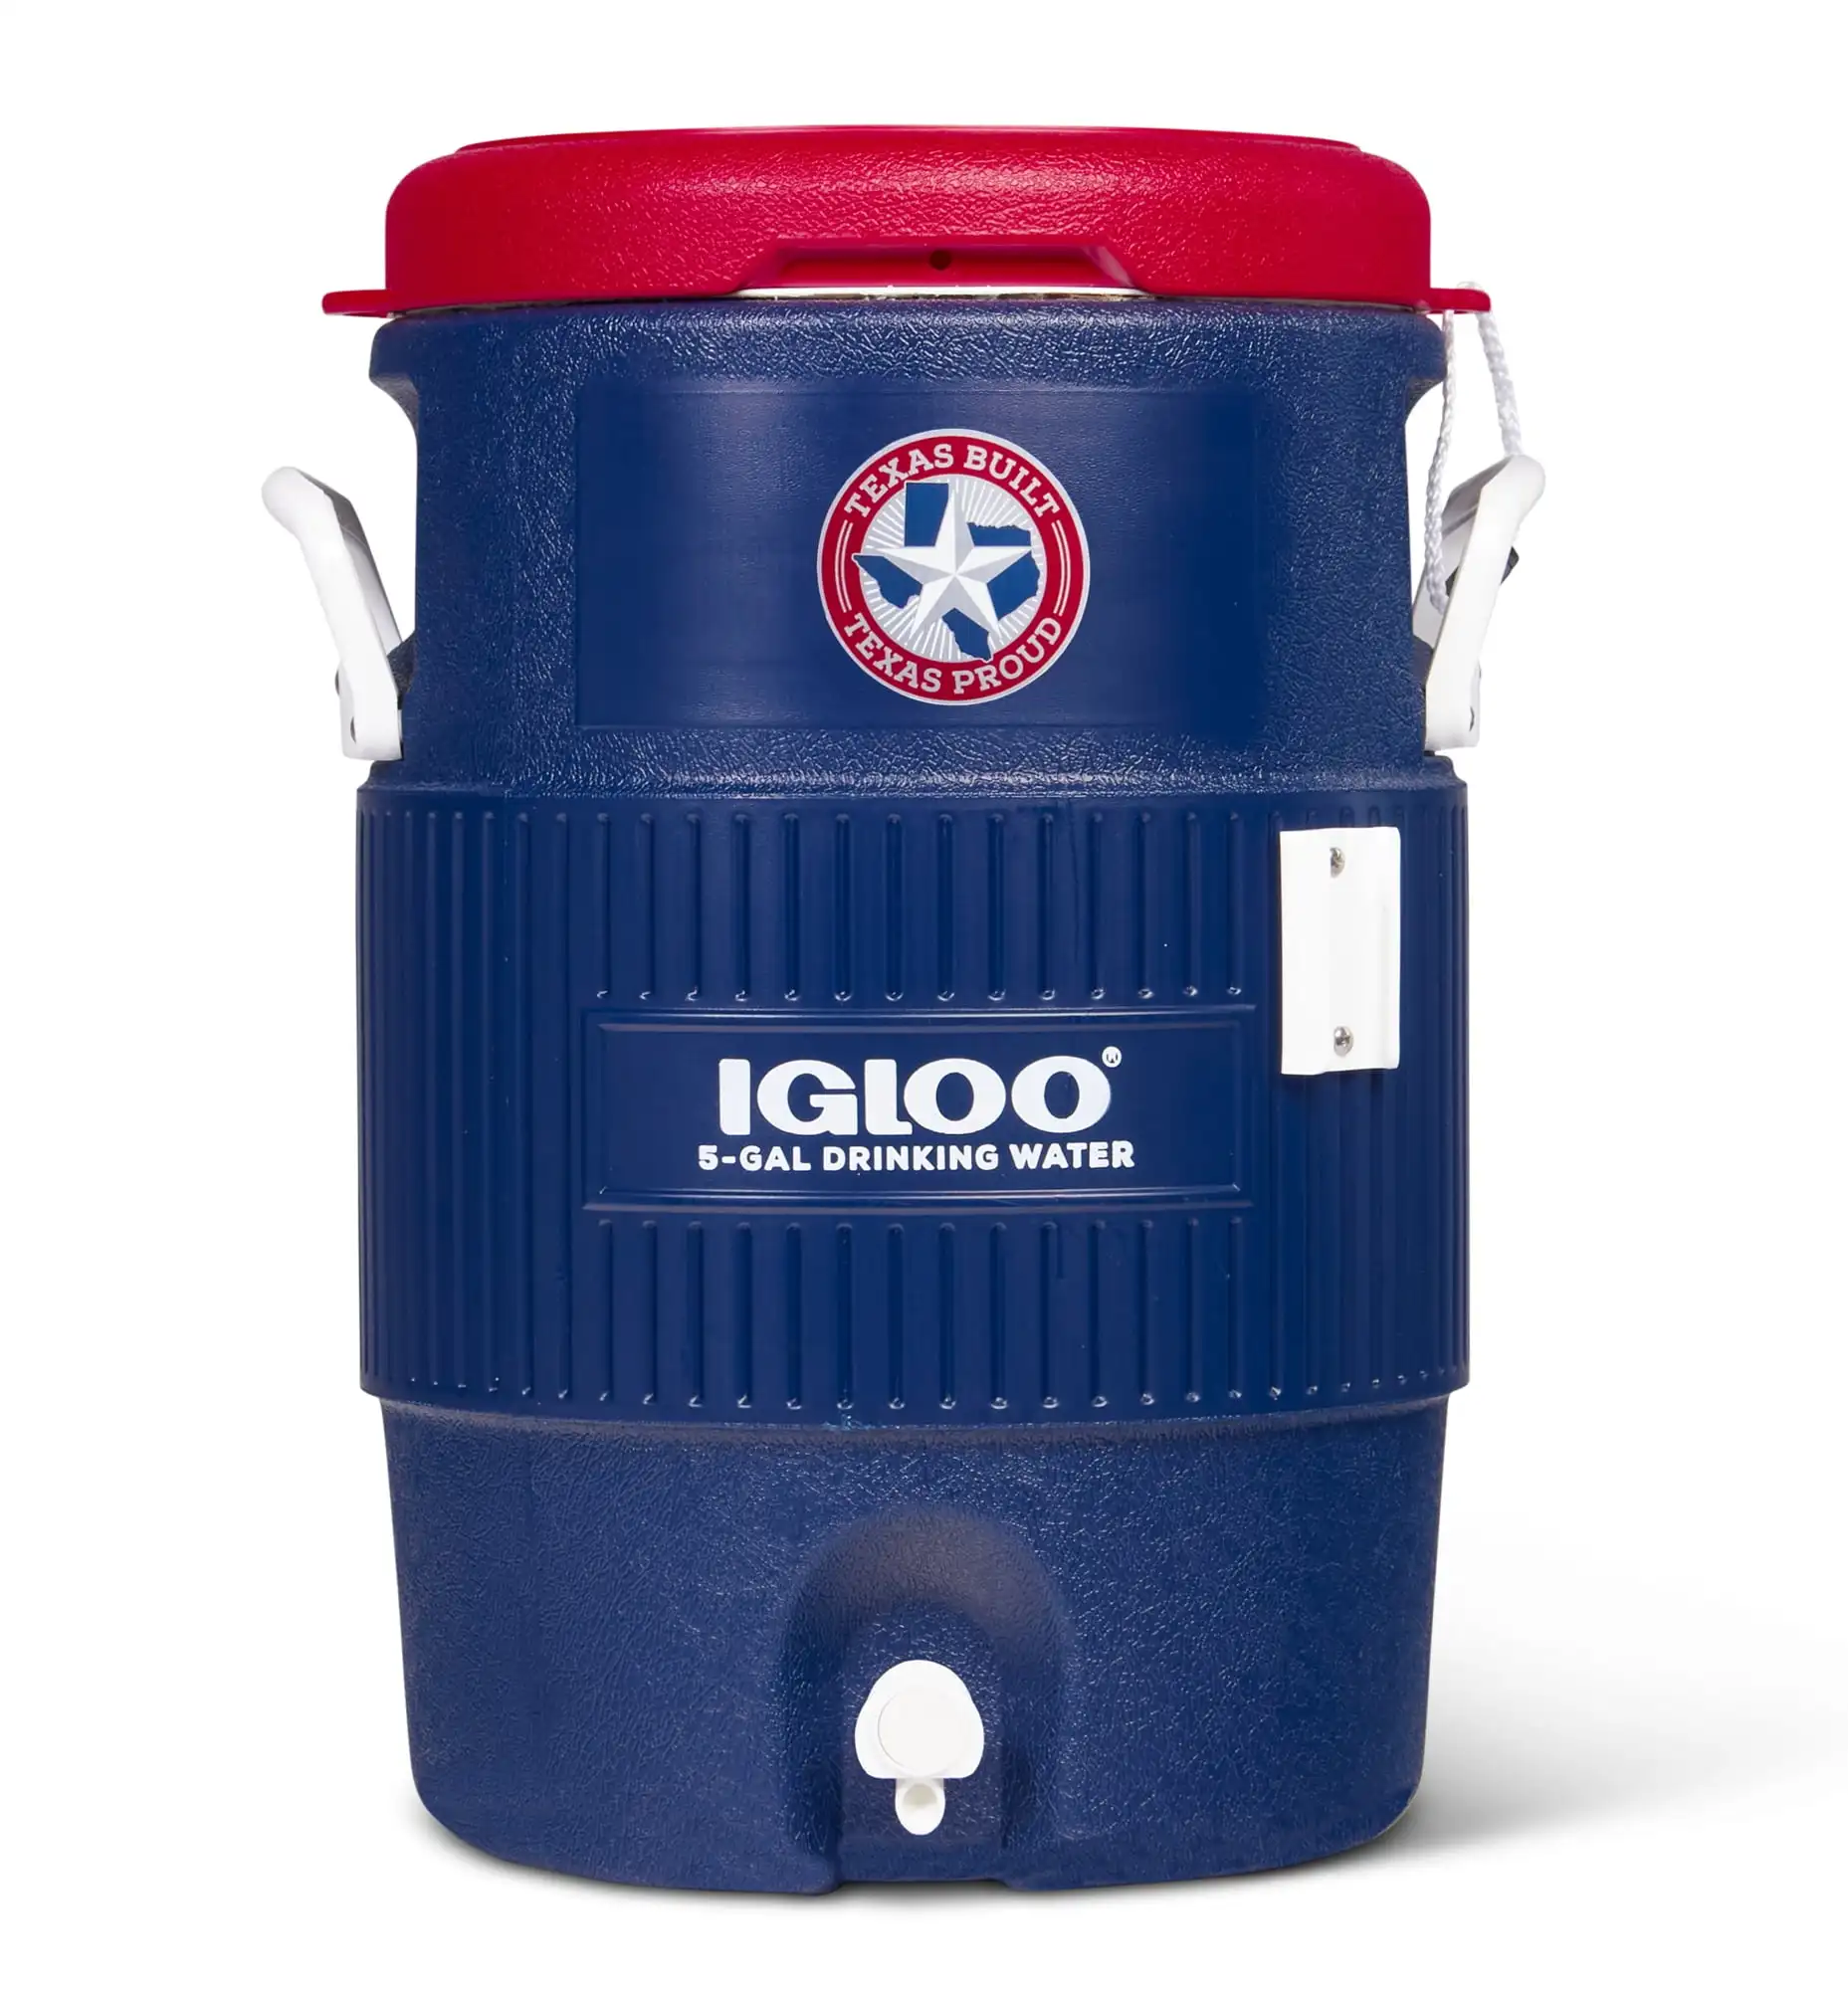 

Igloo 5-Gallon Heavy Duty Seat Top Polyethylene Water Container - Blue Texas Edition